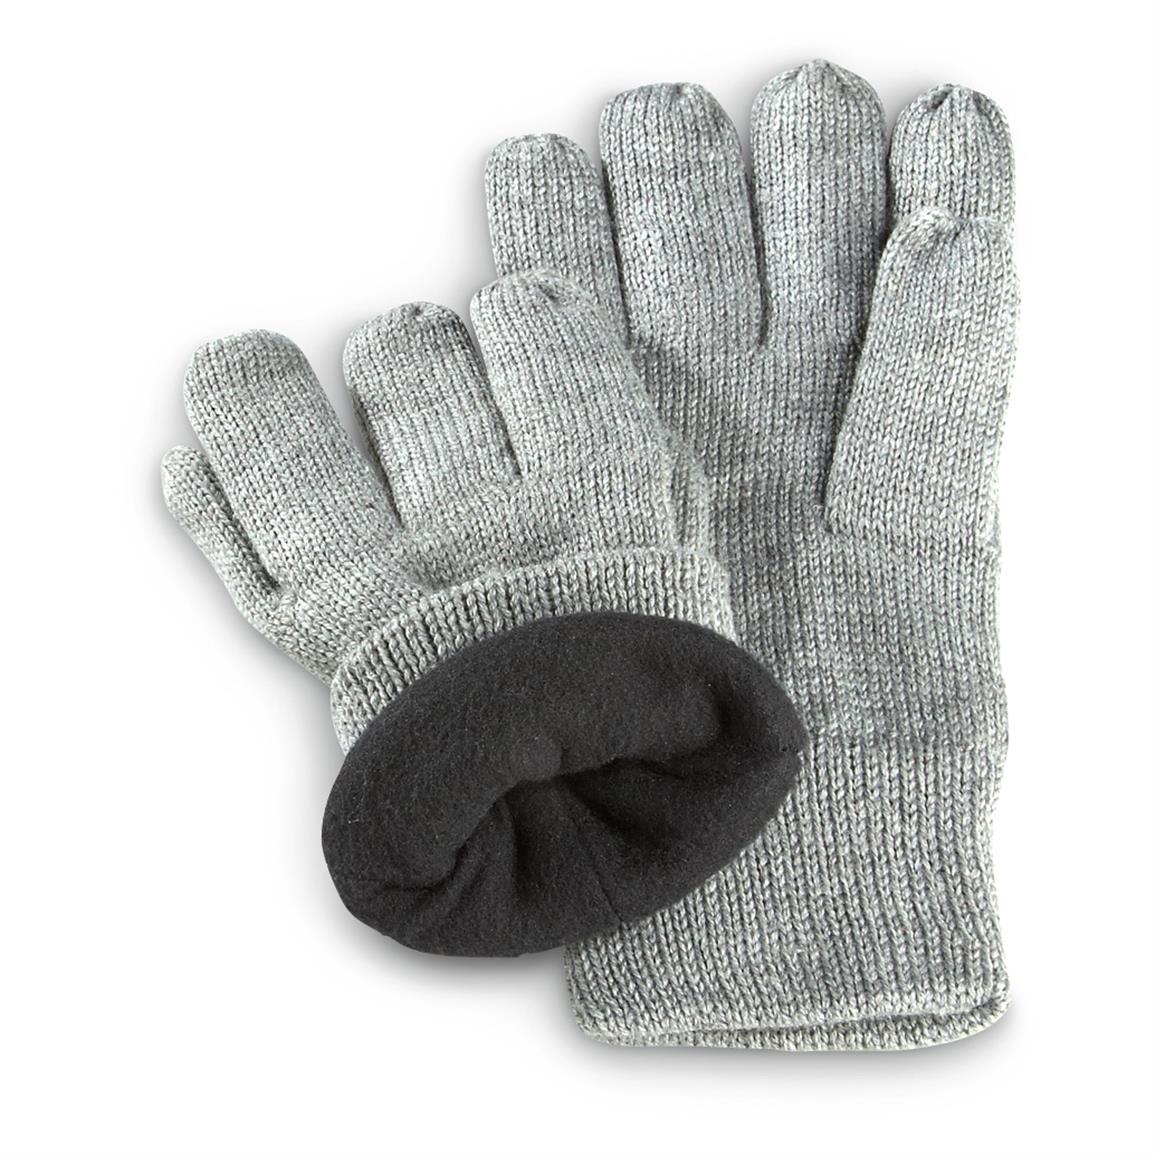 6 Prs. of Military-style Wool-blend Insulated Gloves - 622012, Tactical ...